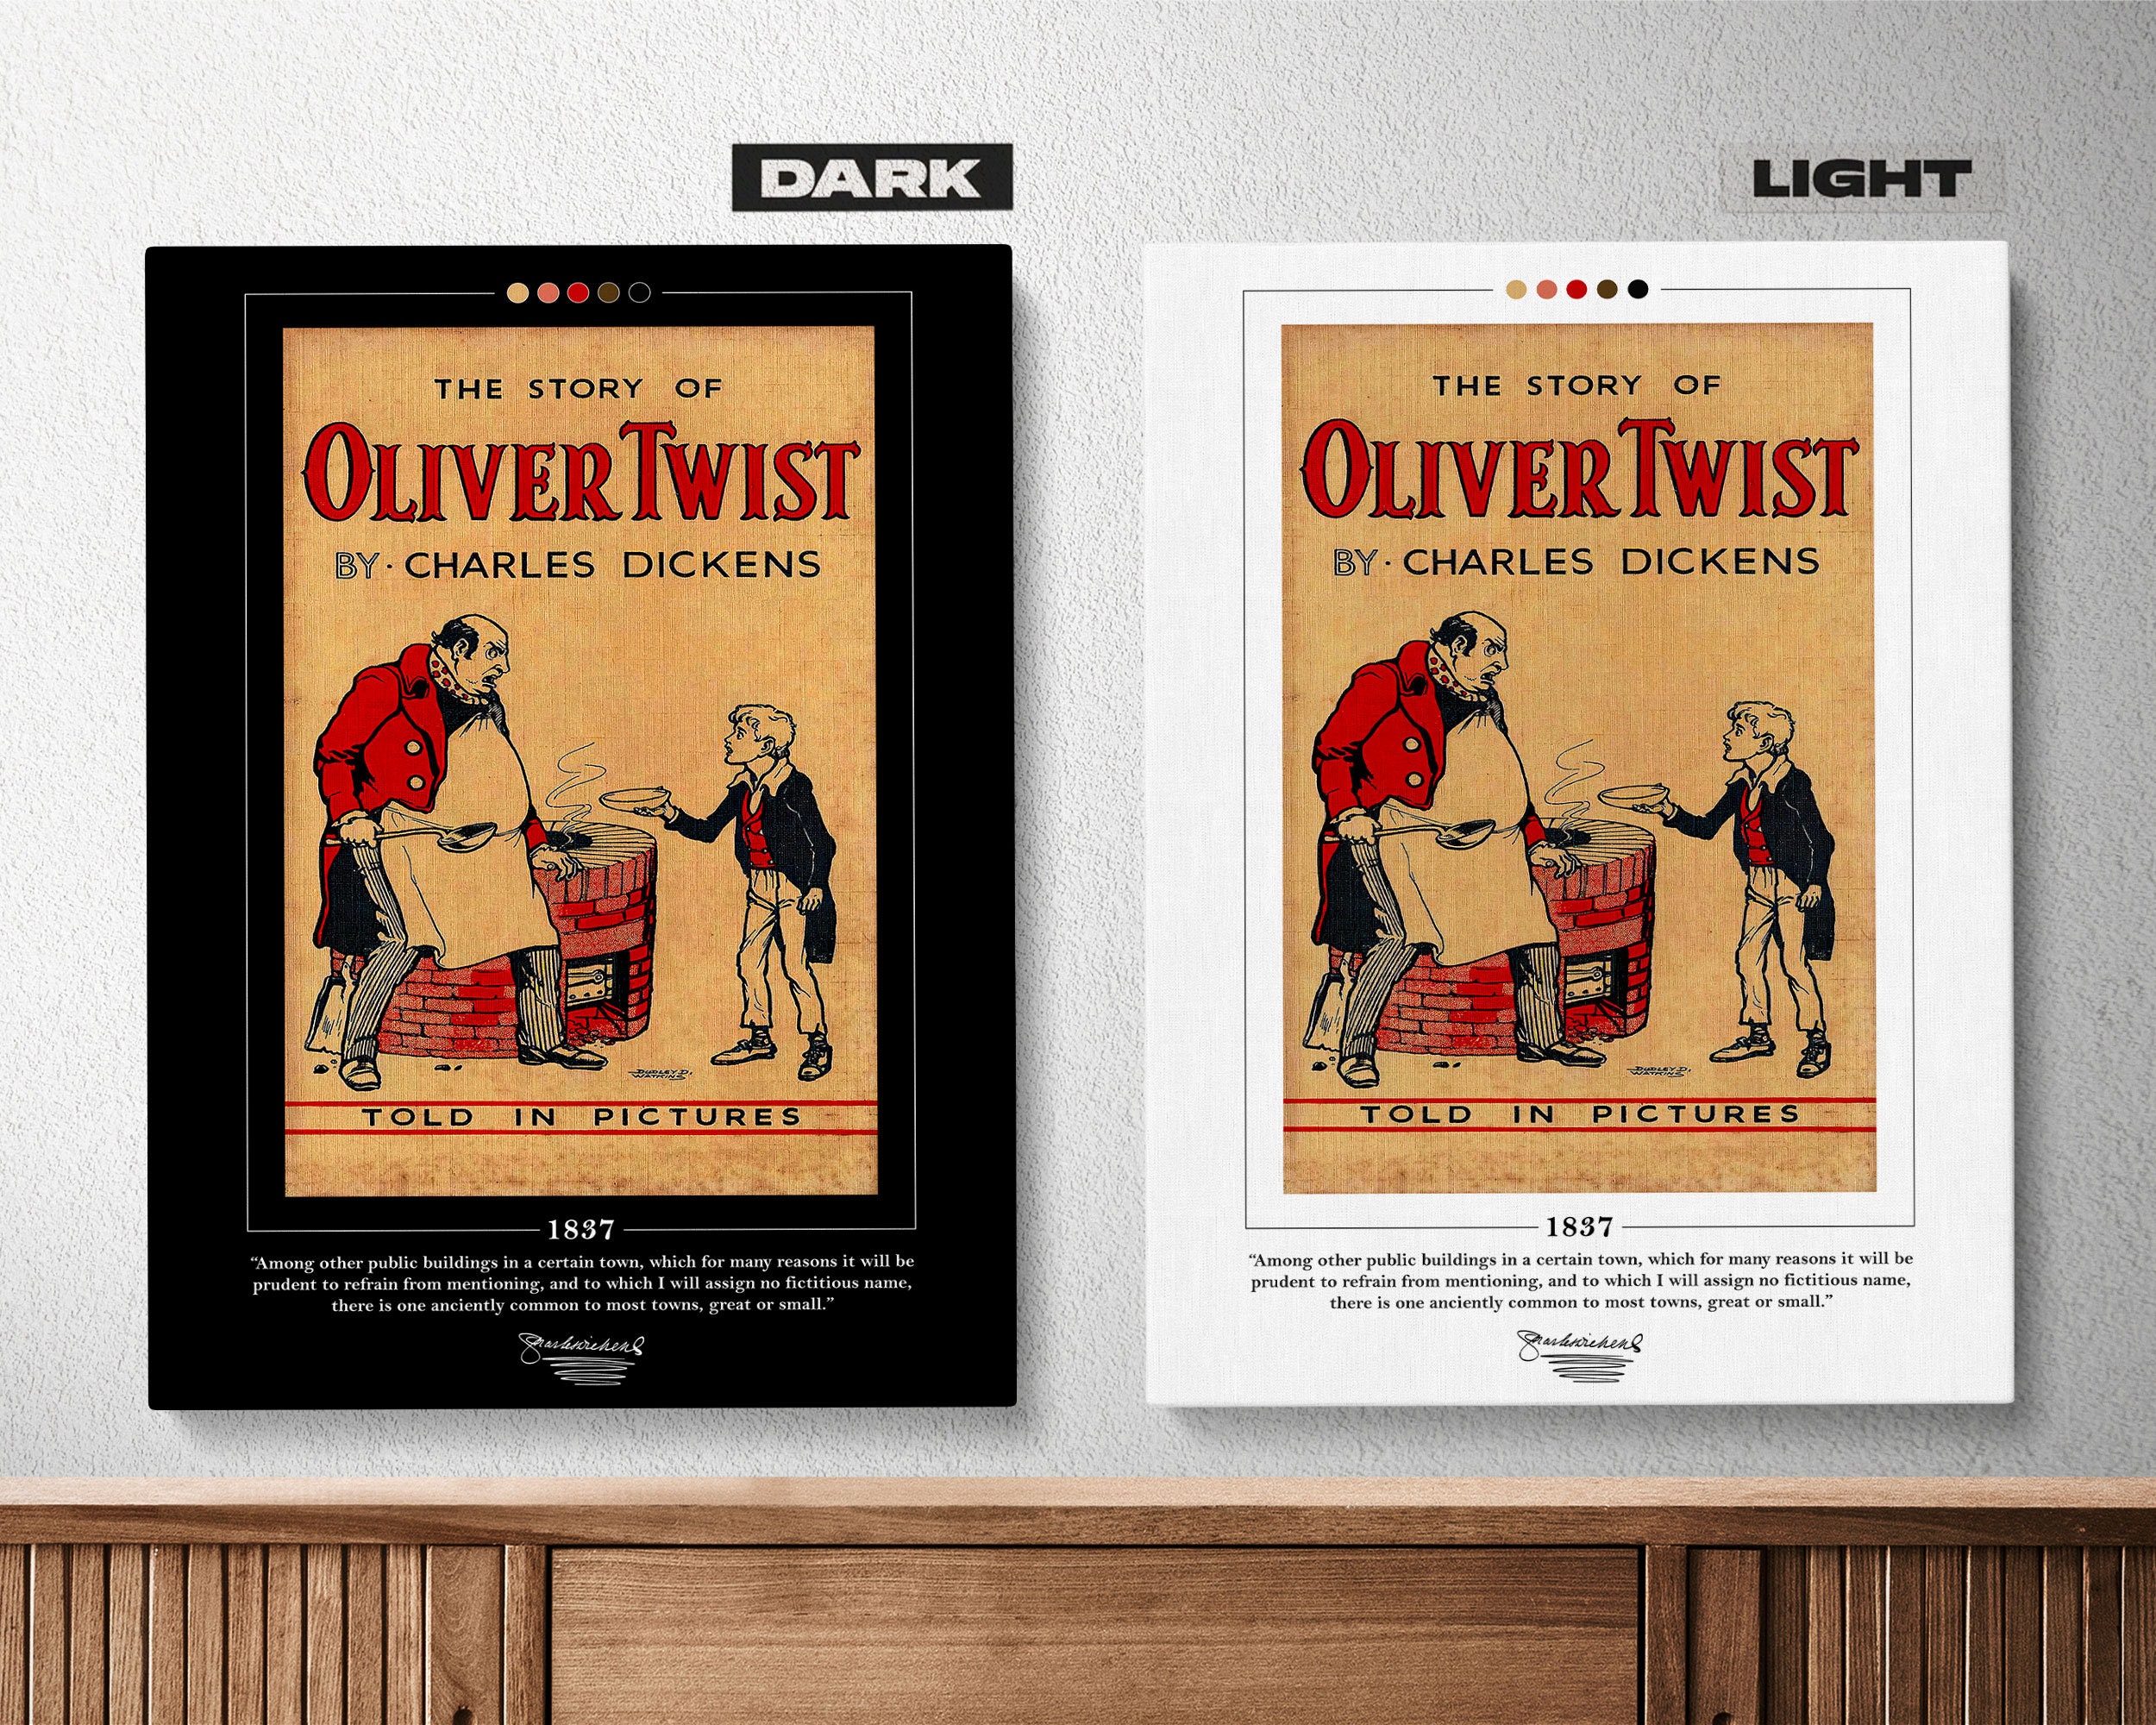  Oliver Twist Title Page - Classroom Library Old Wall Art Book  Cover Print, Great Literary Gifts for Bookish and Book Lovers Best Friend,  11x14 Unframed Typography Book Page Print Poster 